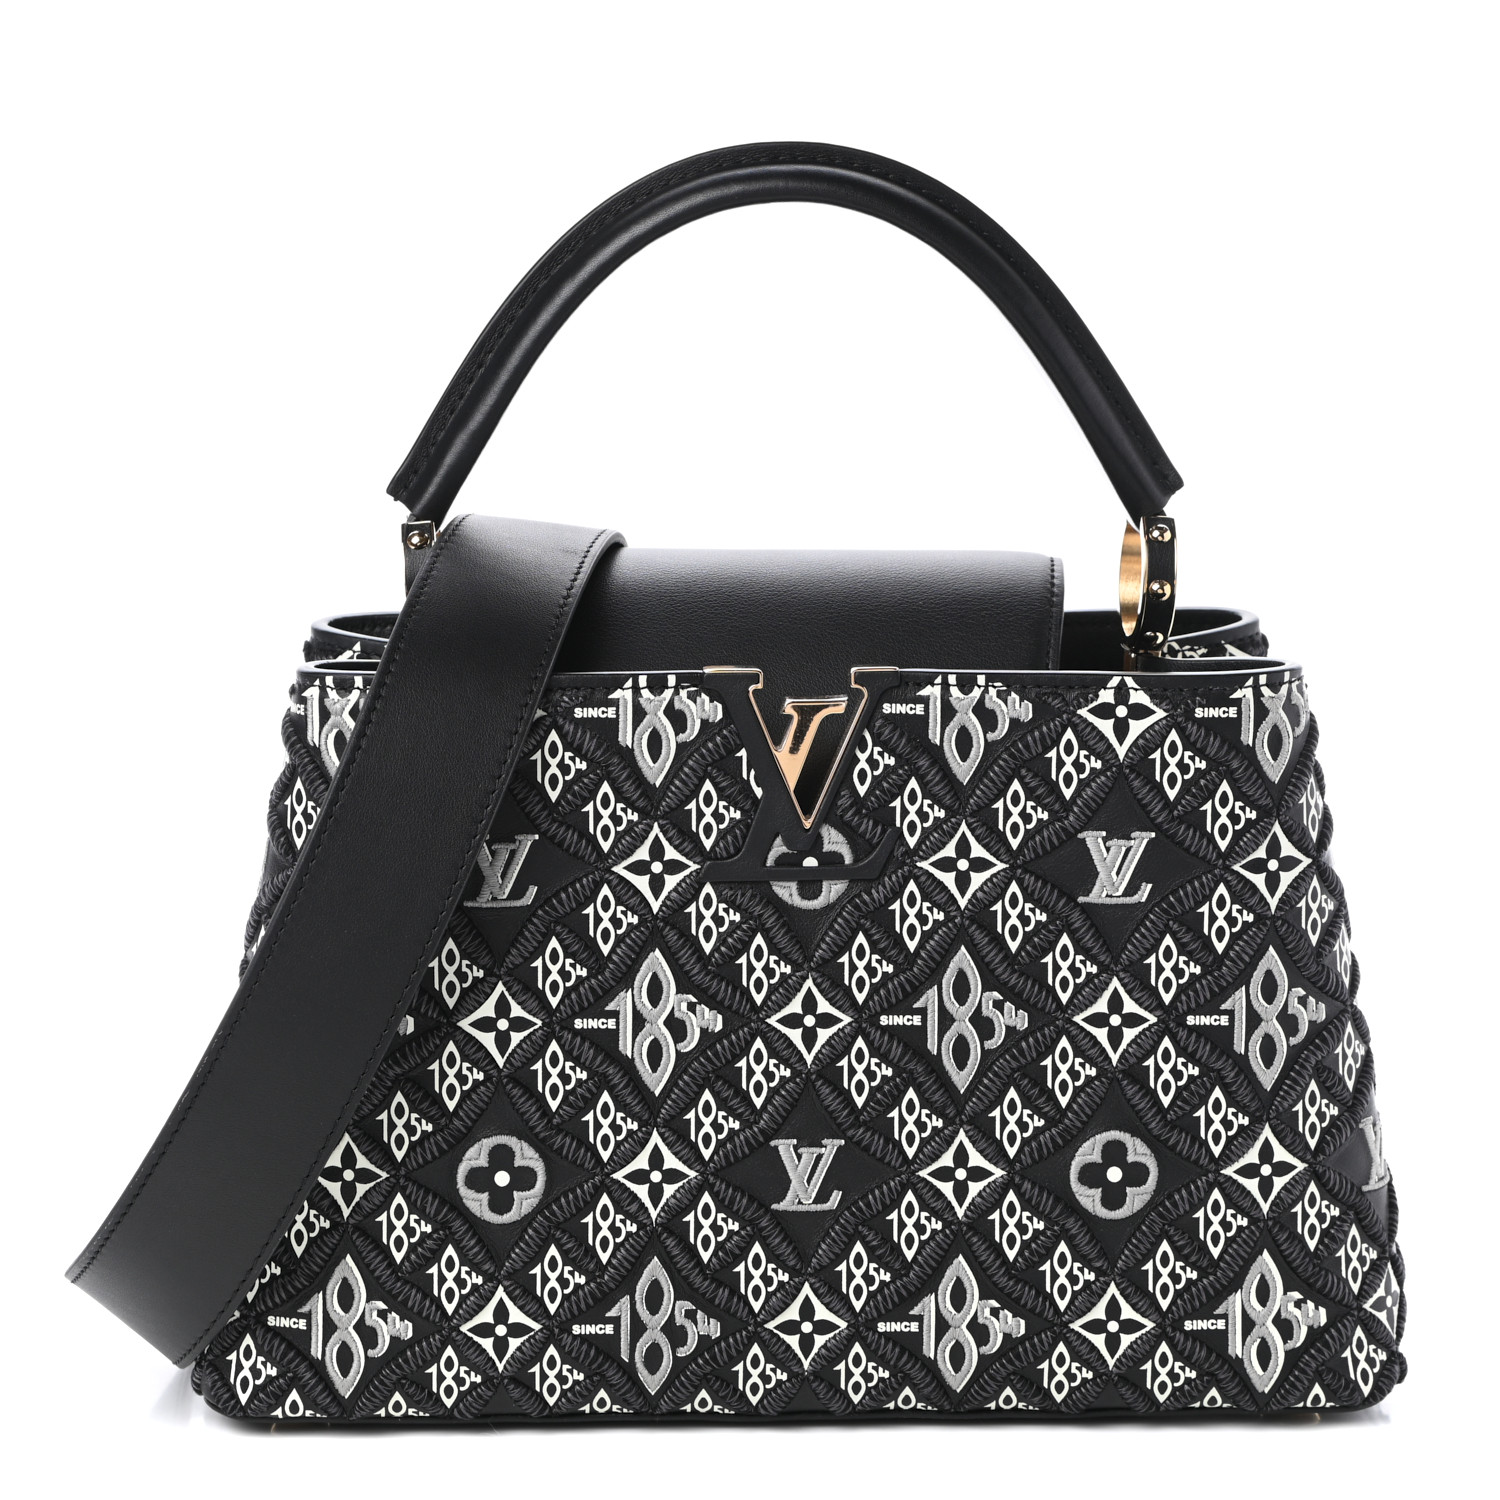 Louis Vuitton Embroidered Calfskin Since 1854 Capucines Mm Black 7730 Fashionphile